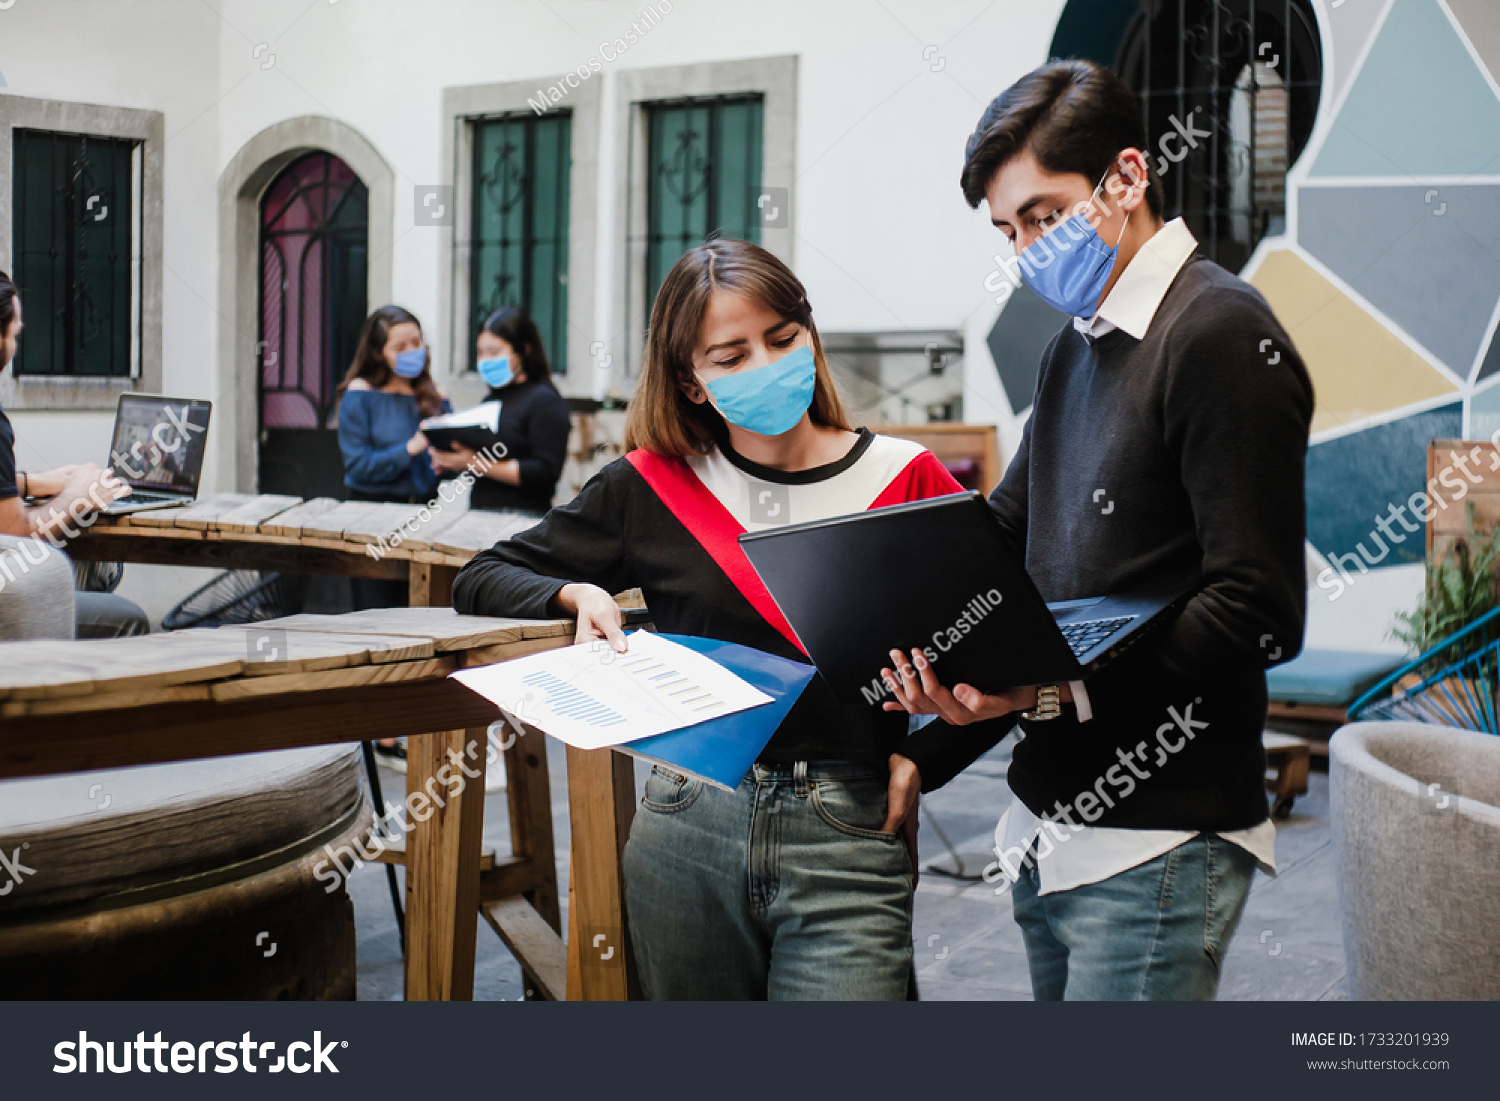 Latin people teamwork working in coworking while wearing face mask for social distancing in new normal situation preventing the infection of corona virus or covid-19, Mexican Coworkers in Mexico #1733201939